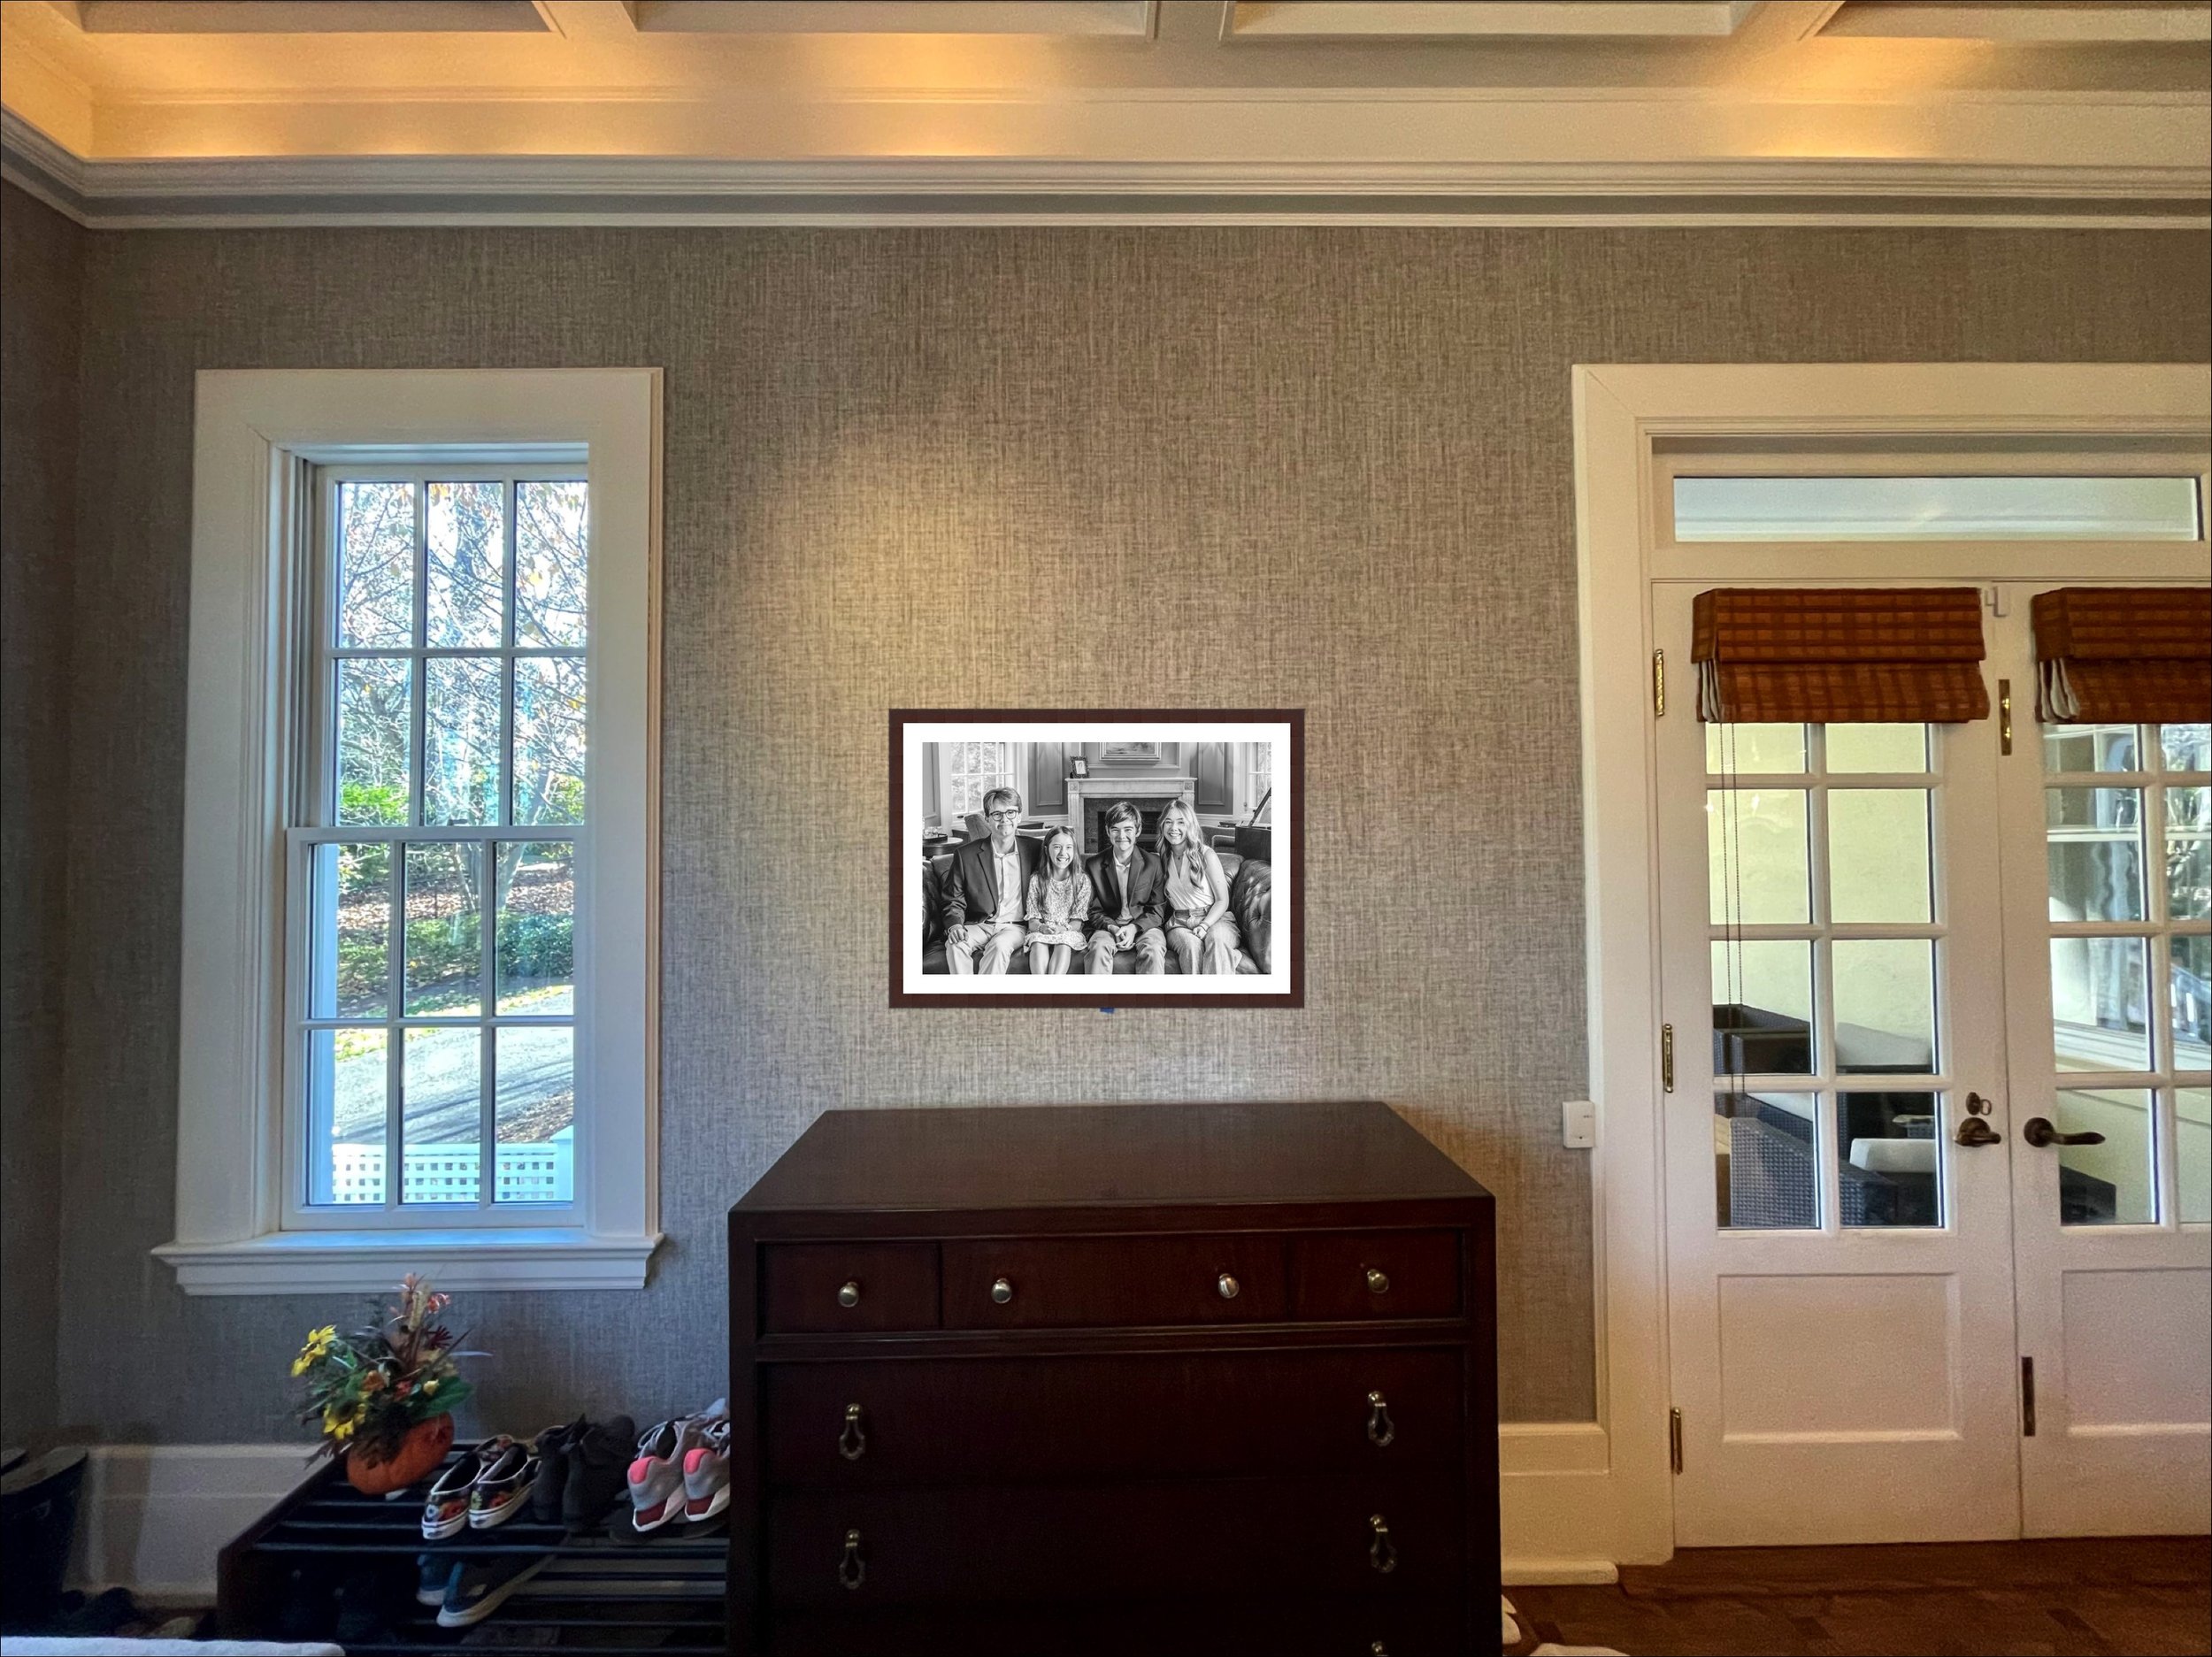  An after-portrait of a wall in the home with a family photo displayed taken by Nicole Hawkins Photography. high-end photography #NicoleHawkinsPhotography #NicoleHawkinsFamilyPortrait #NicoleHawkinsSenior #NJPortraits #siblingportrait 